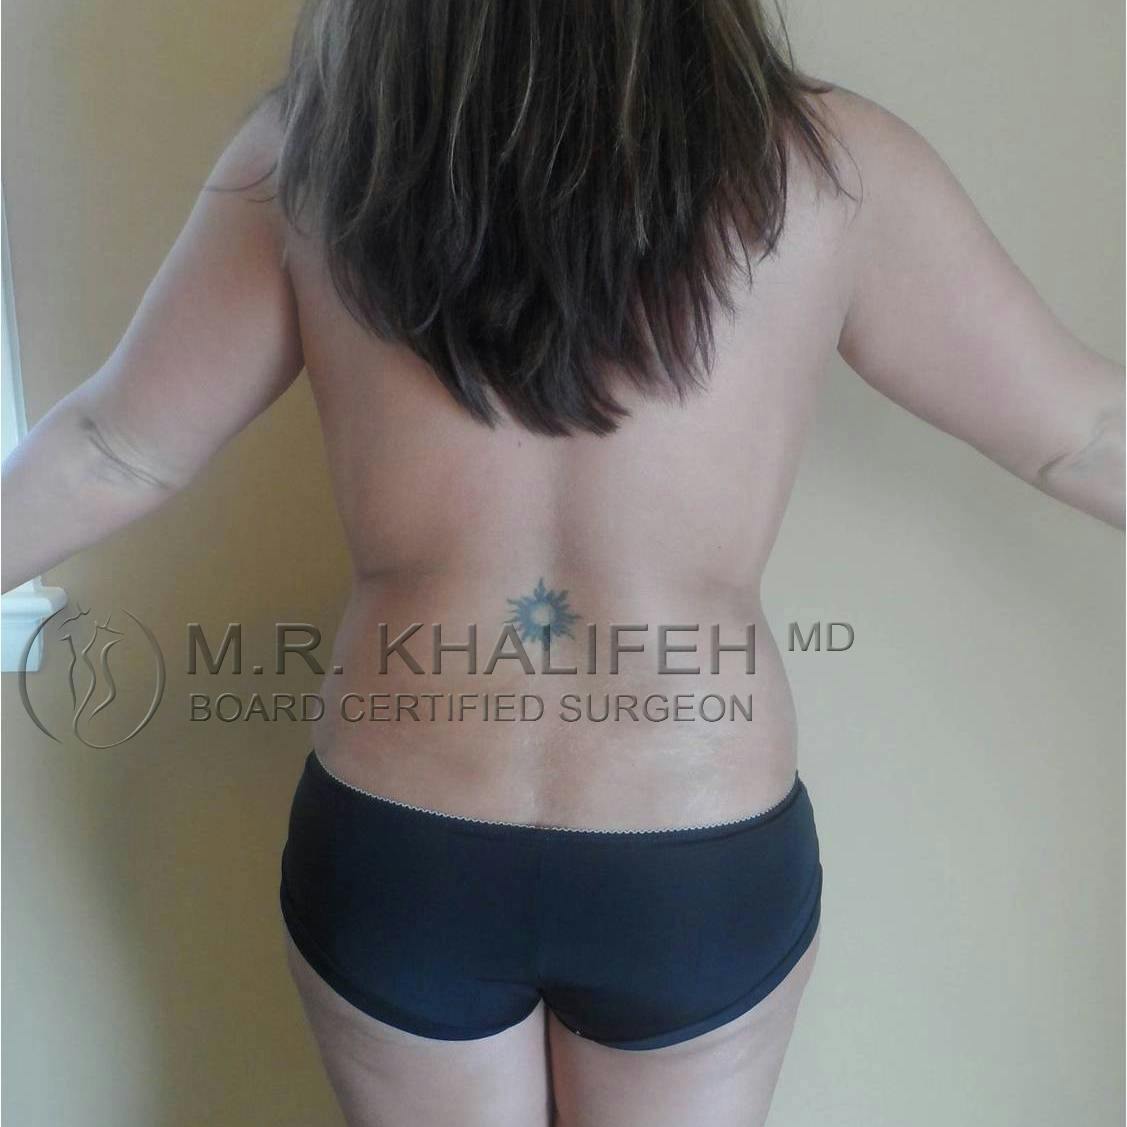 Tummy Tuck Gallery - Patient 3762172 - Image 4